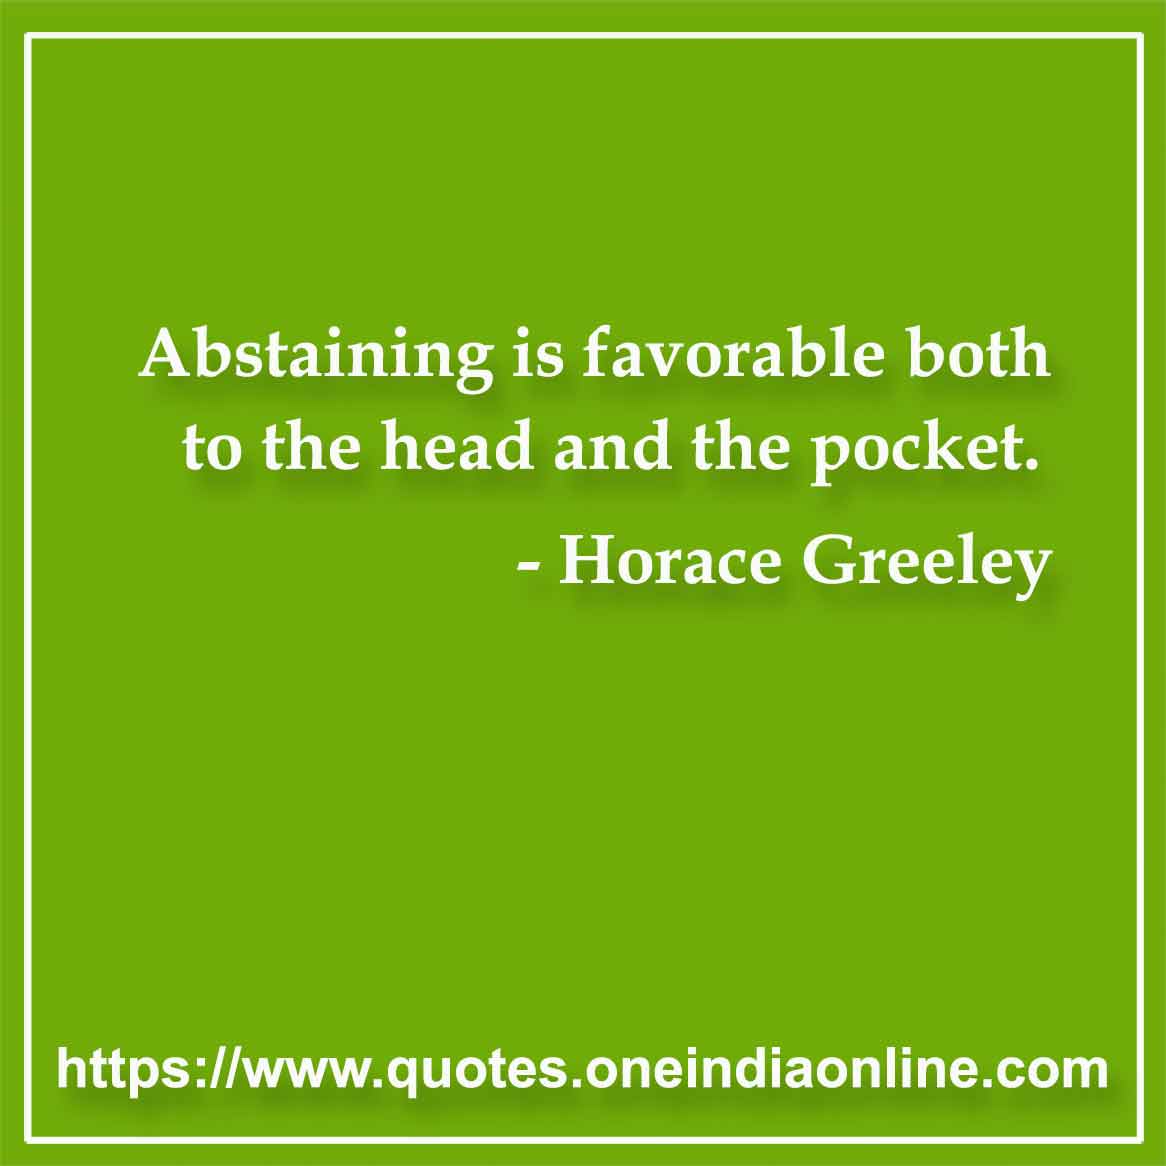 Abstaining is favorable both to the head and the pocket.

- Horace Greeley